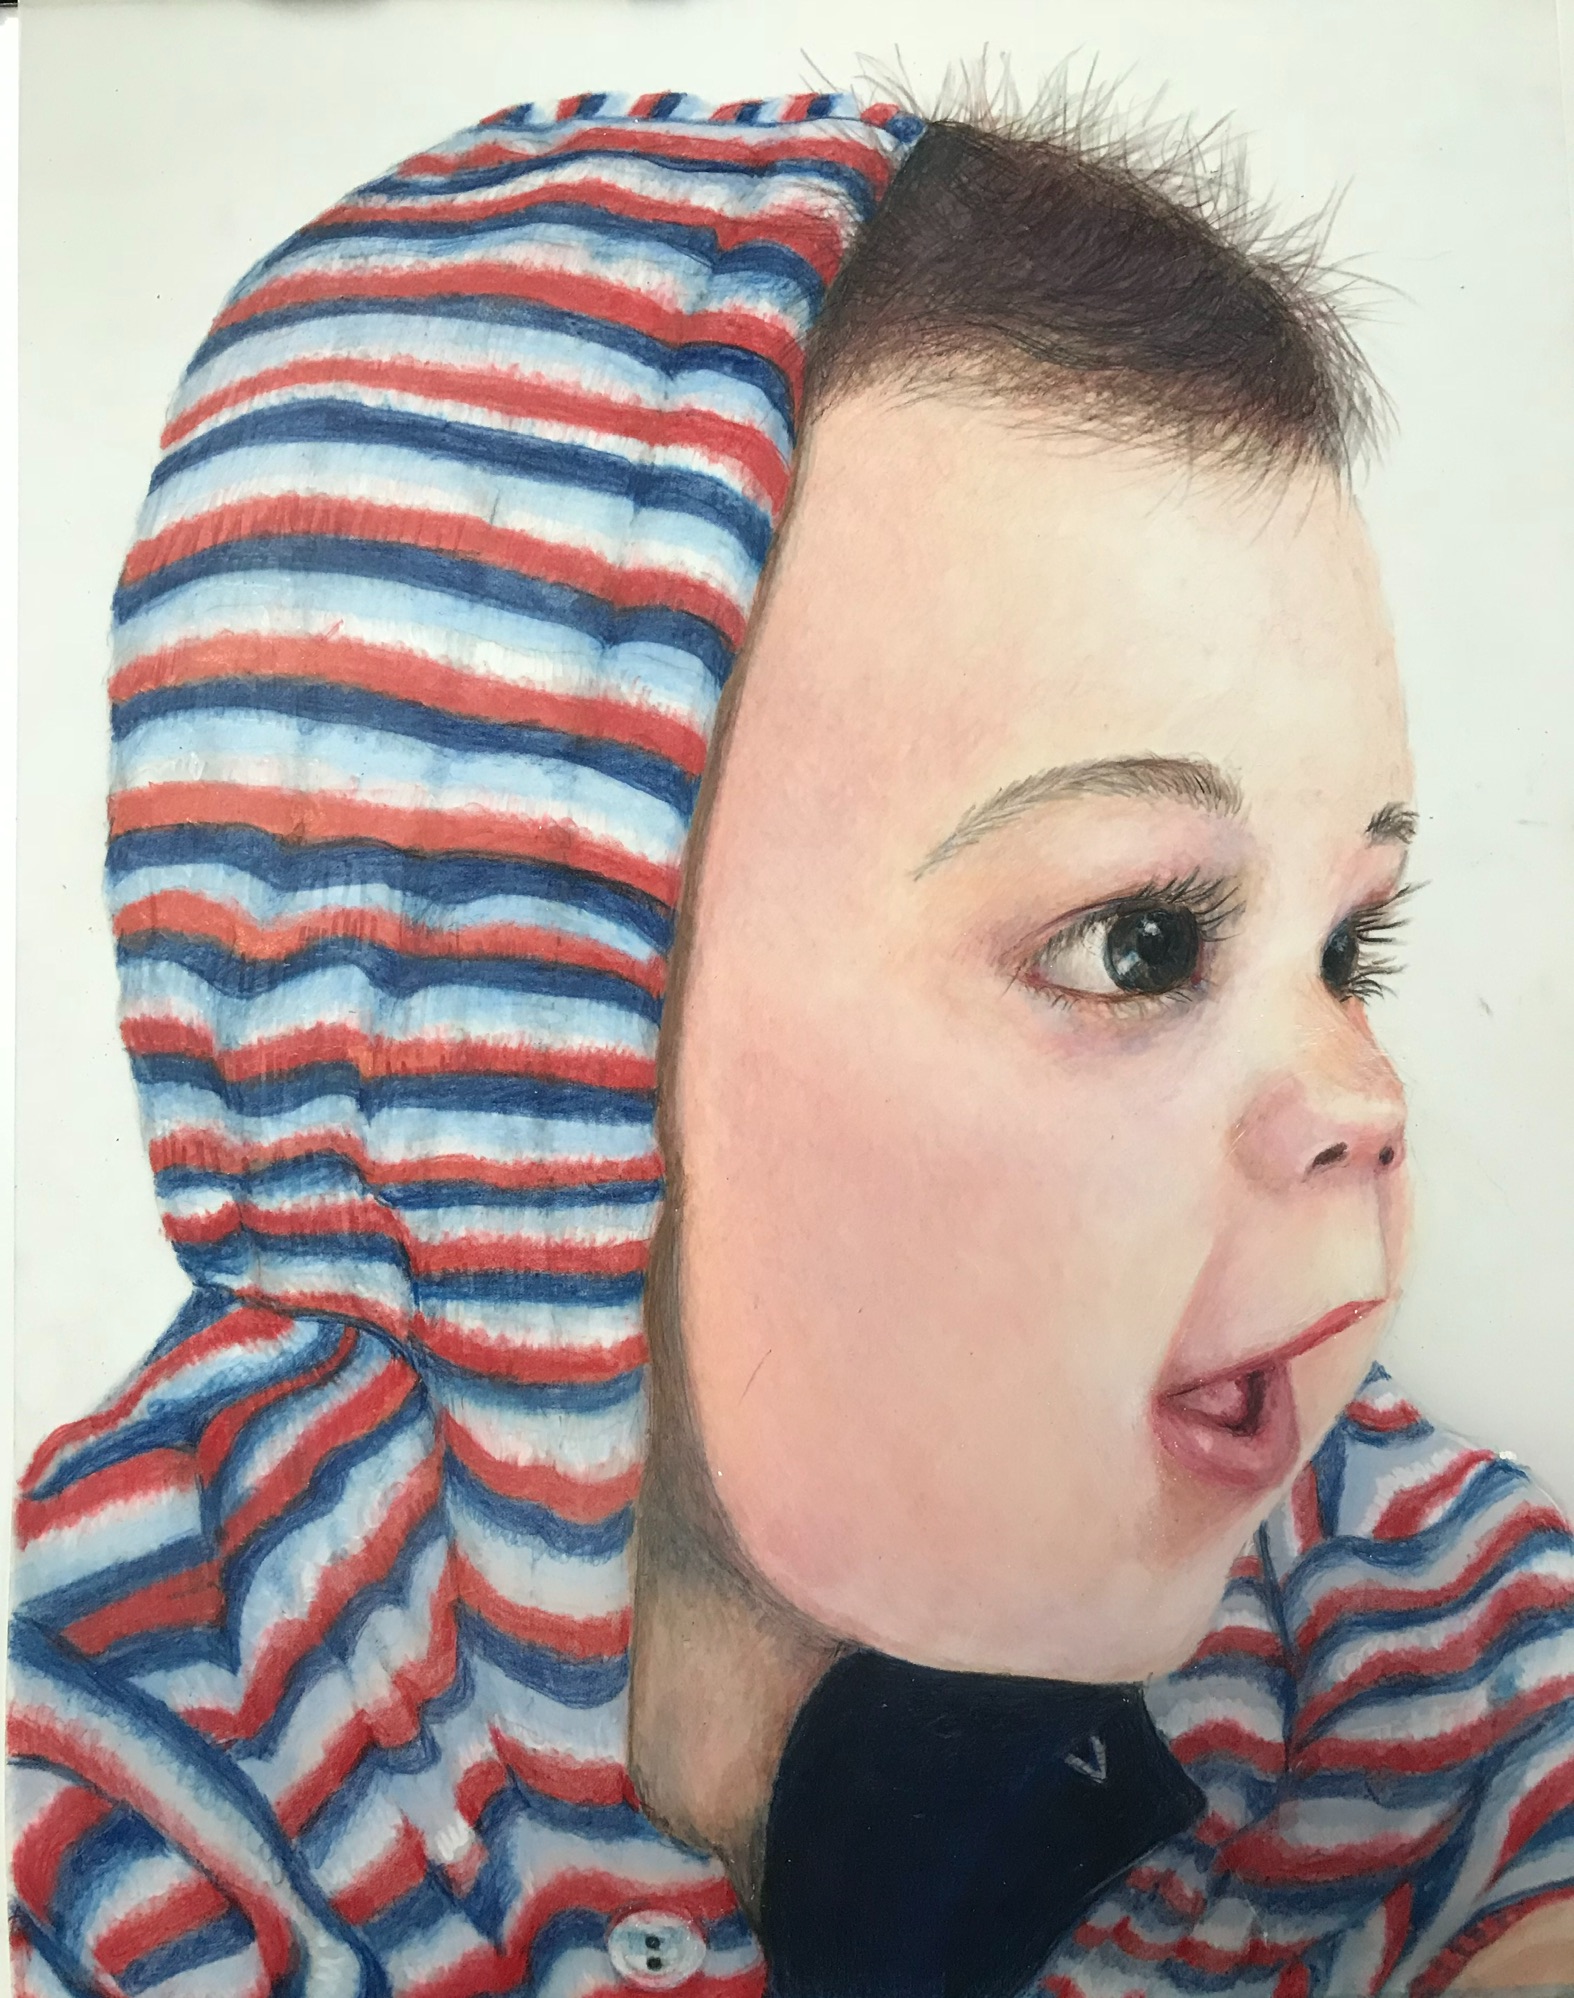 Child in Colored Pencil on Drafting Film